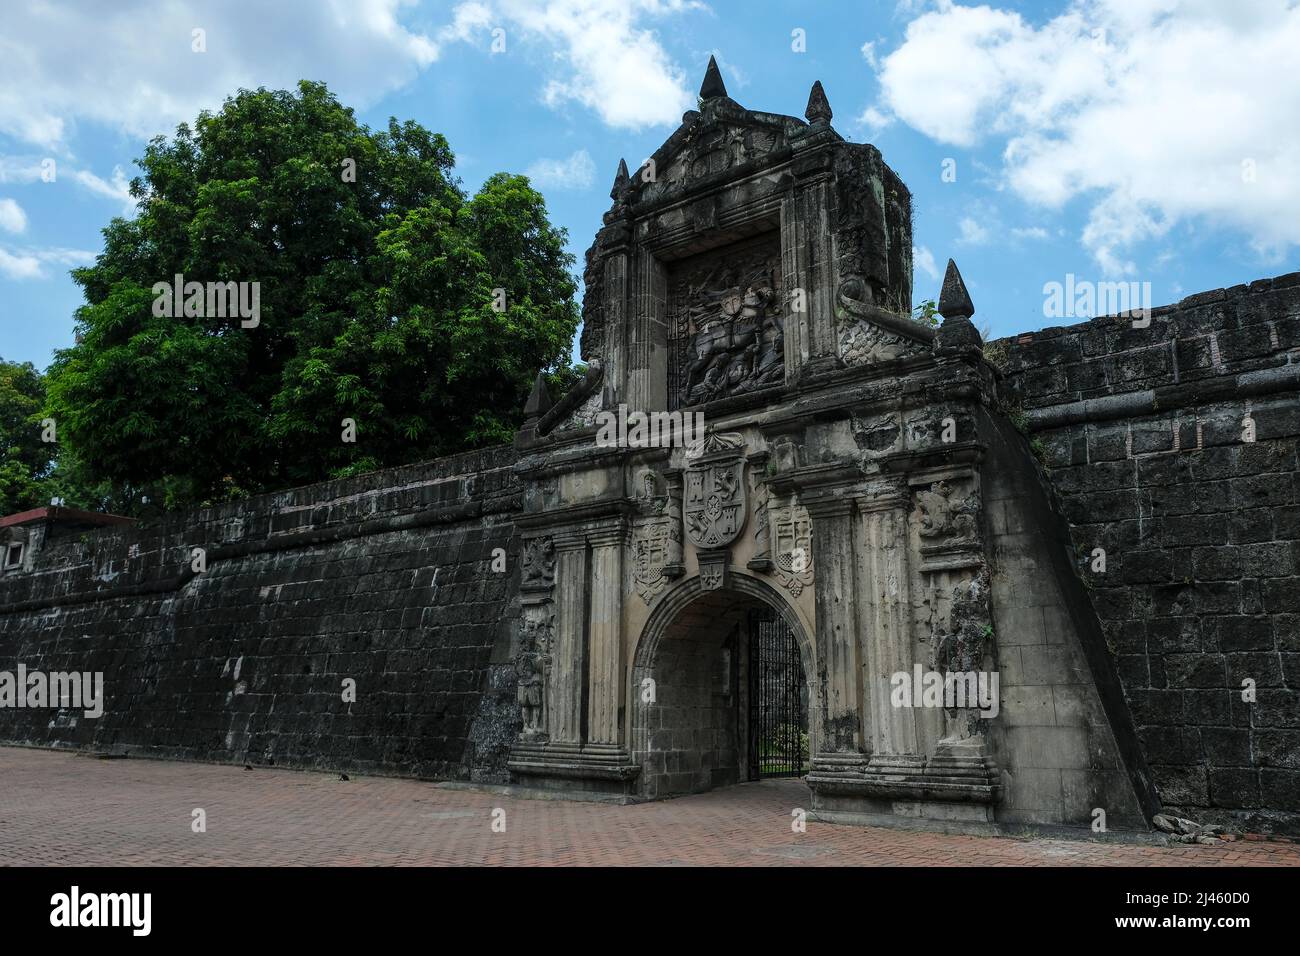 Fort Santiago Gate in Intramuros, Manila, Philippines. The defense fortress is located in Intramuros, the walled city of Manila. Stock Photo